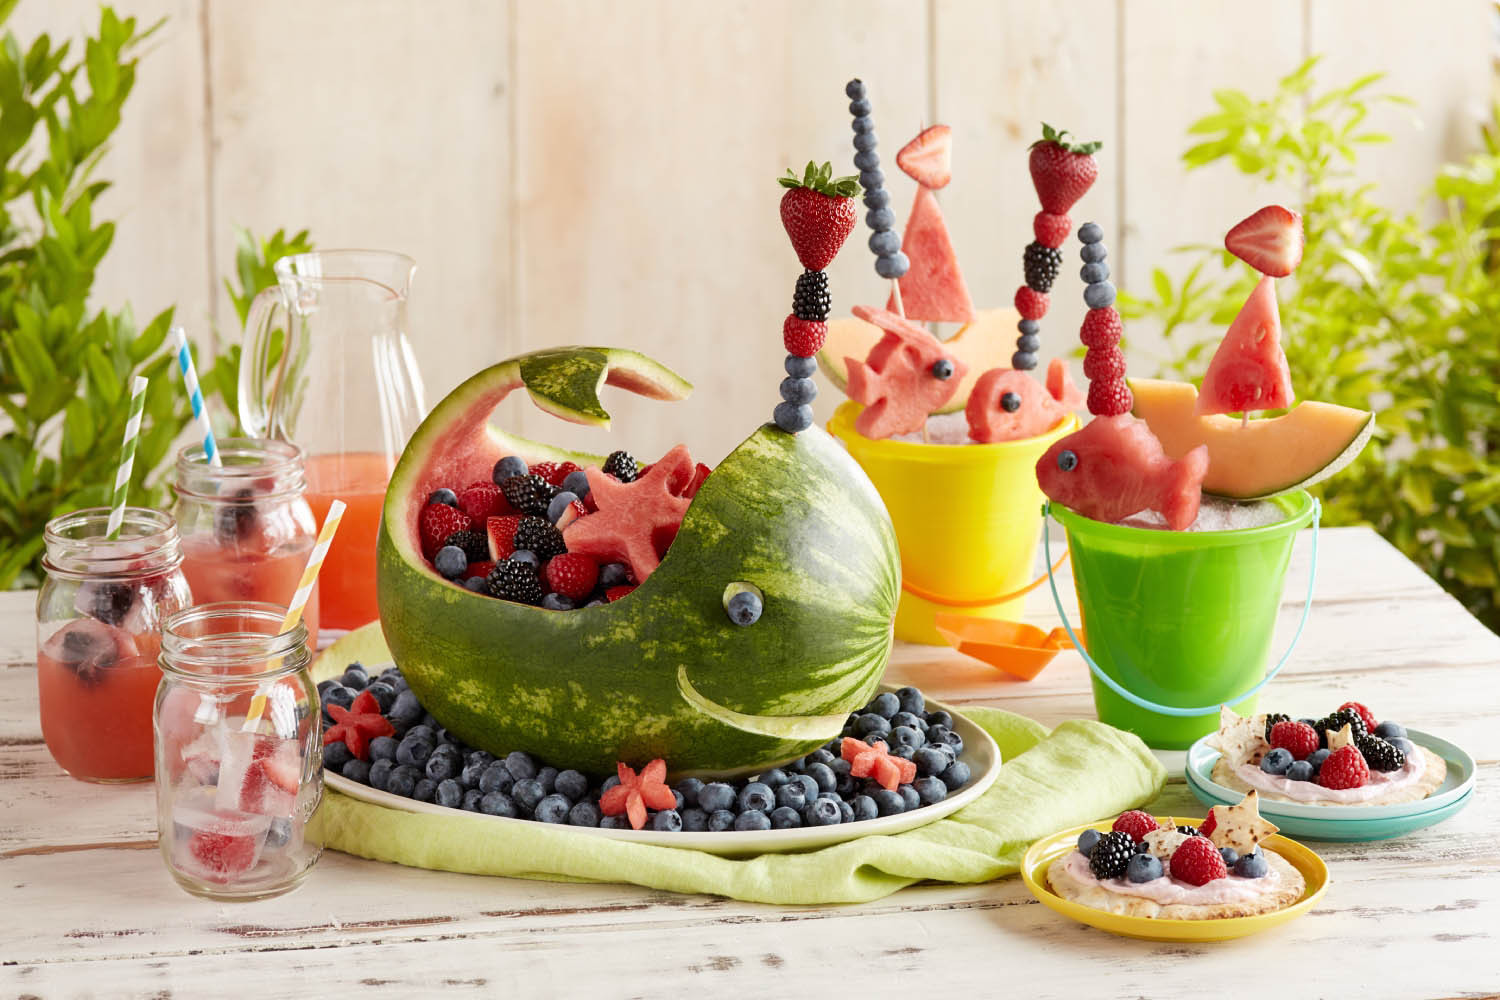 Food Ideas For Party At The Beach
 Splash into Summer with a Berry Beach Party